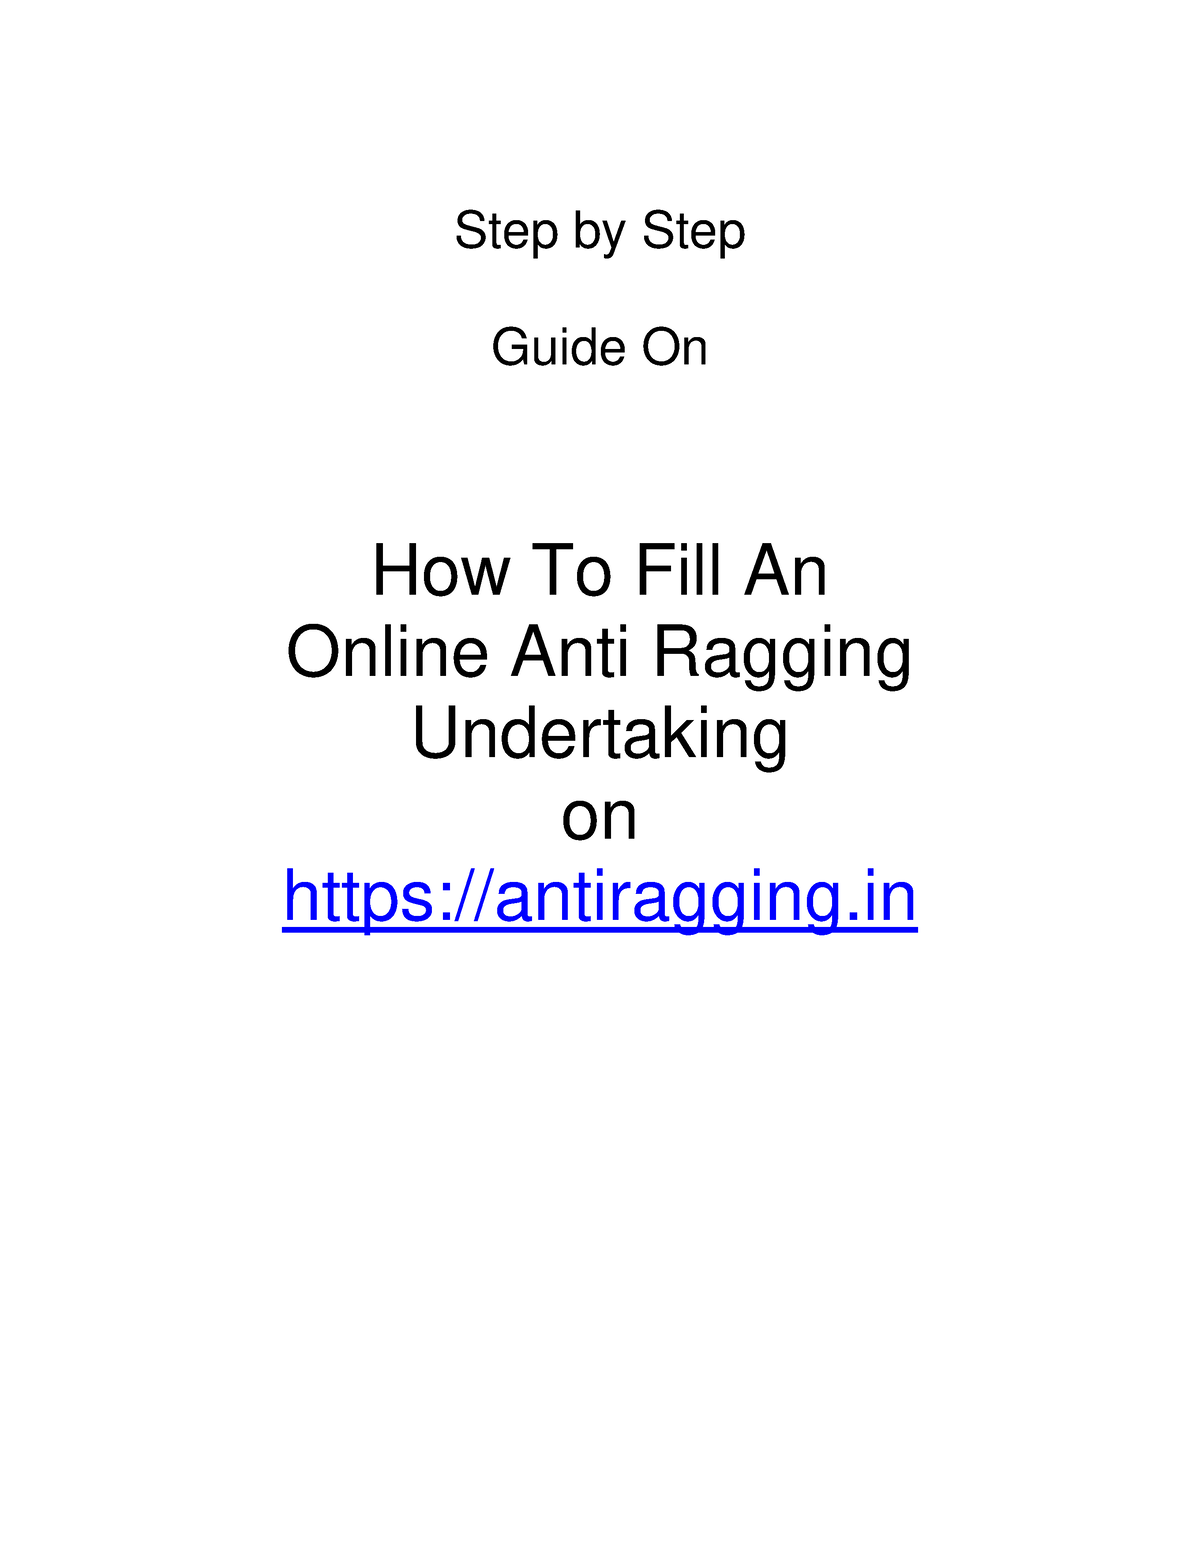 8408691-step-by-step-guide-on-how-to-fill-online-anti-ragging